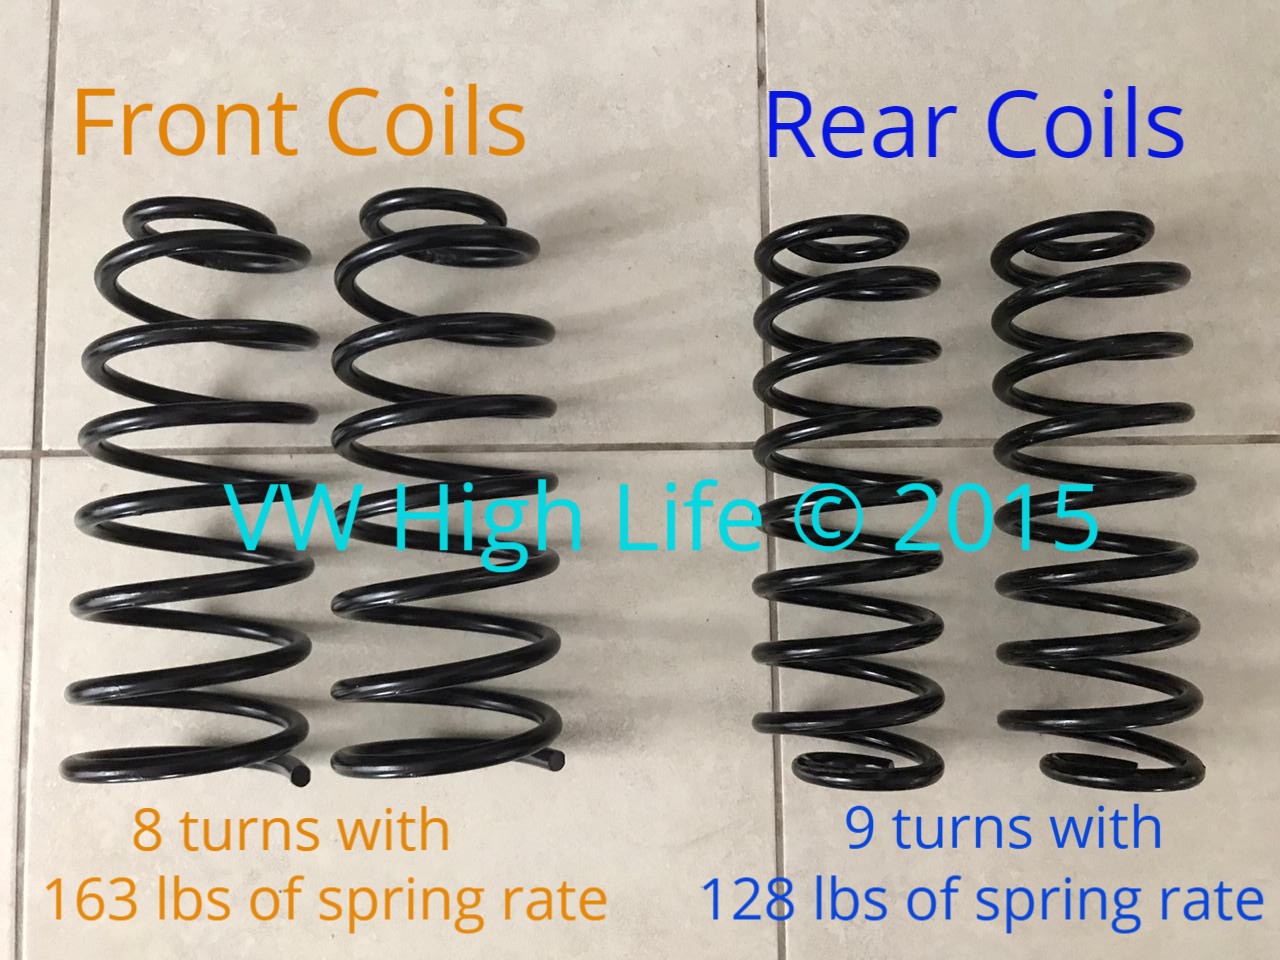 Firmer Front and Rear Coils.